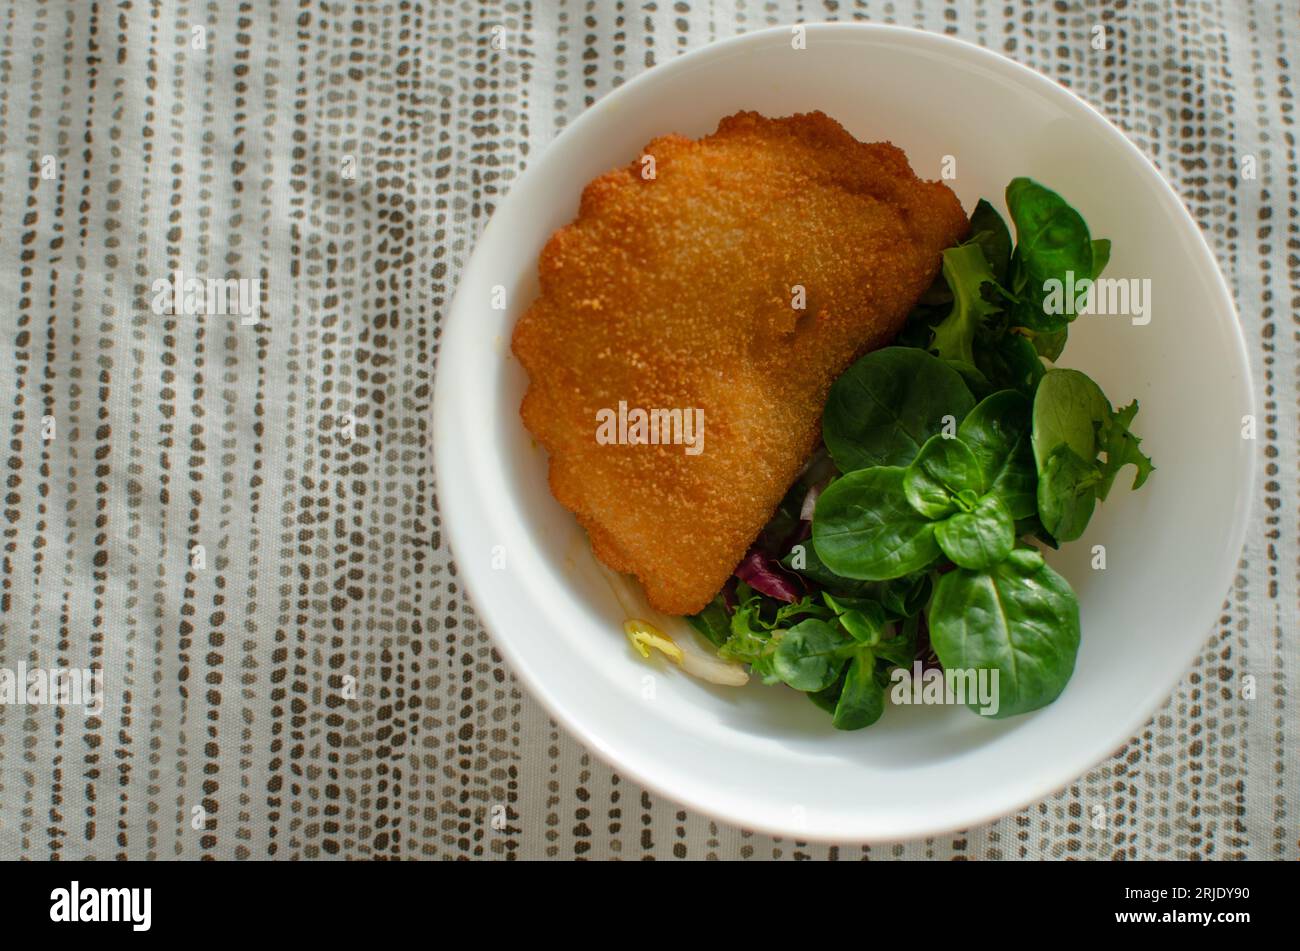 Rissois de Camarao portuguese deep fried pastry pie with shrimps served with greens in white bowl on beige printed textile tablecloth. Food photograhy Stock Photo